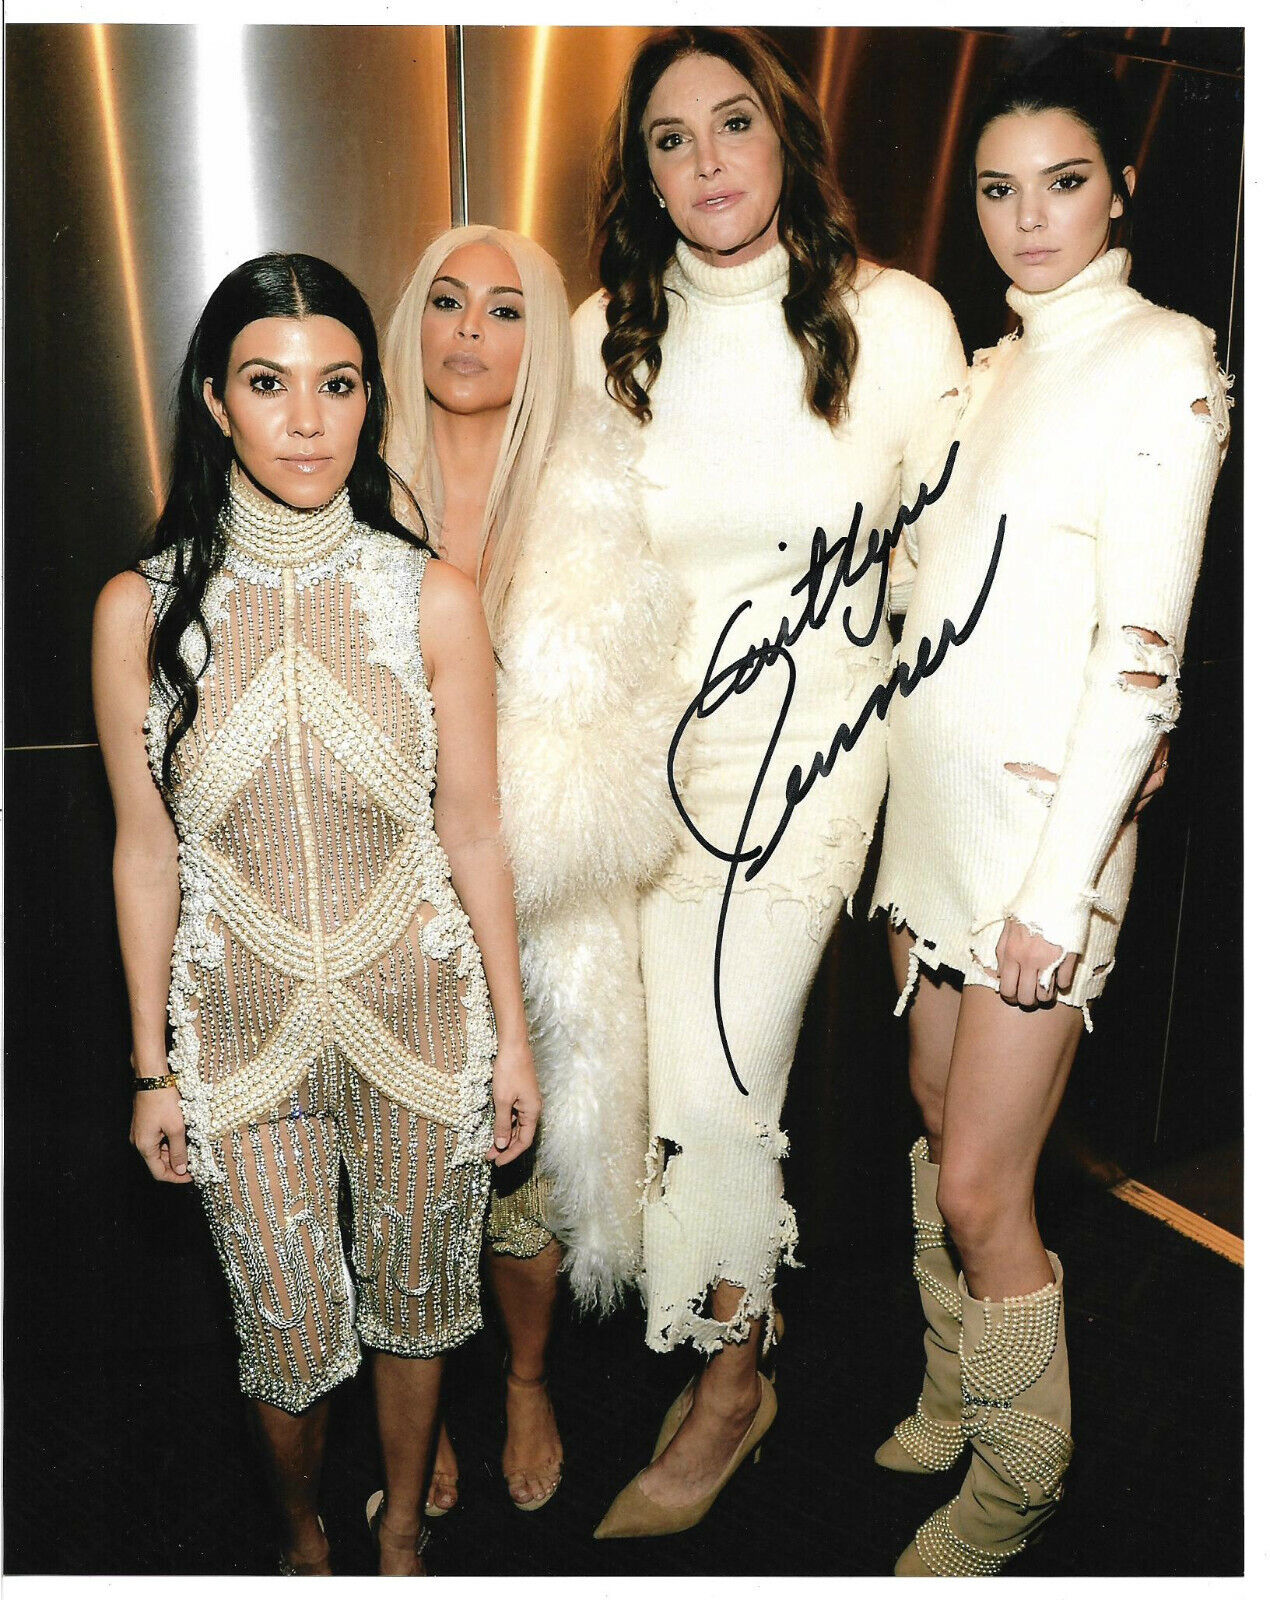 Caitlyn Jenner Signed 8x10 Photo Poster painting Autographed, Pictured w/ Kim, Kylie, Kendall